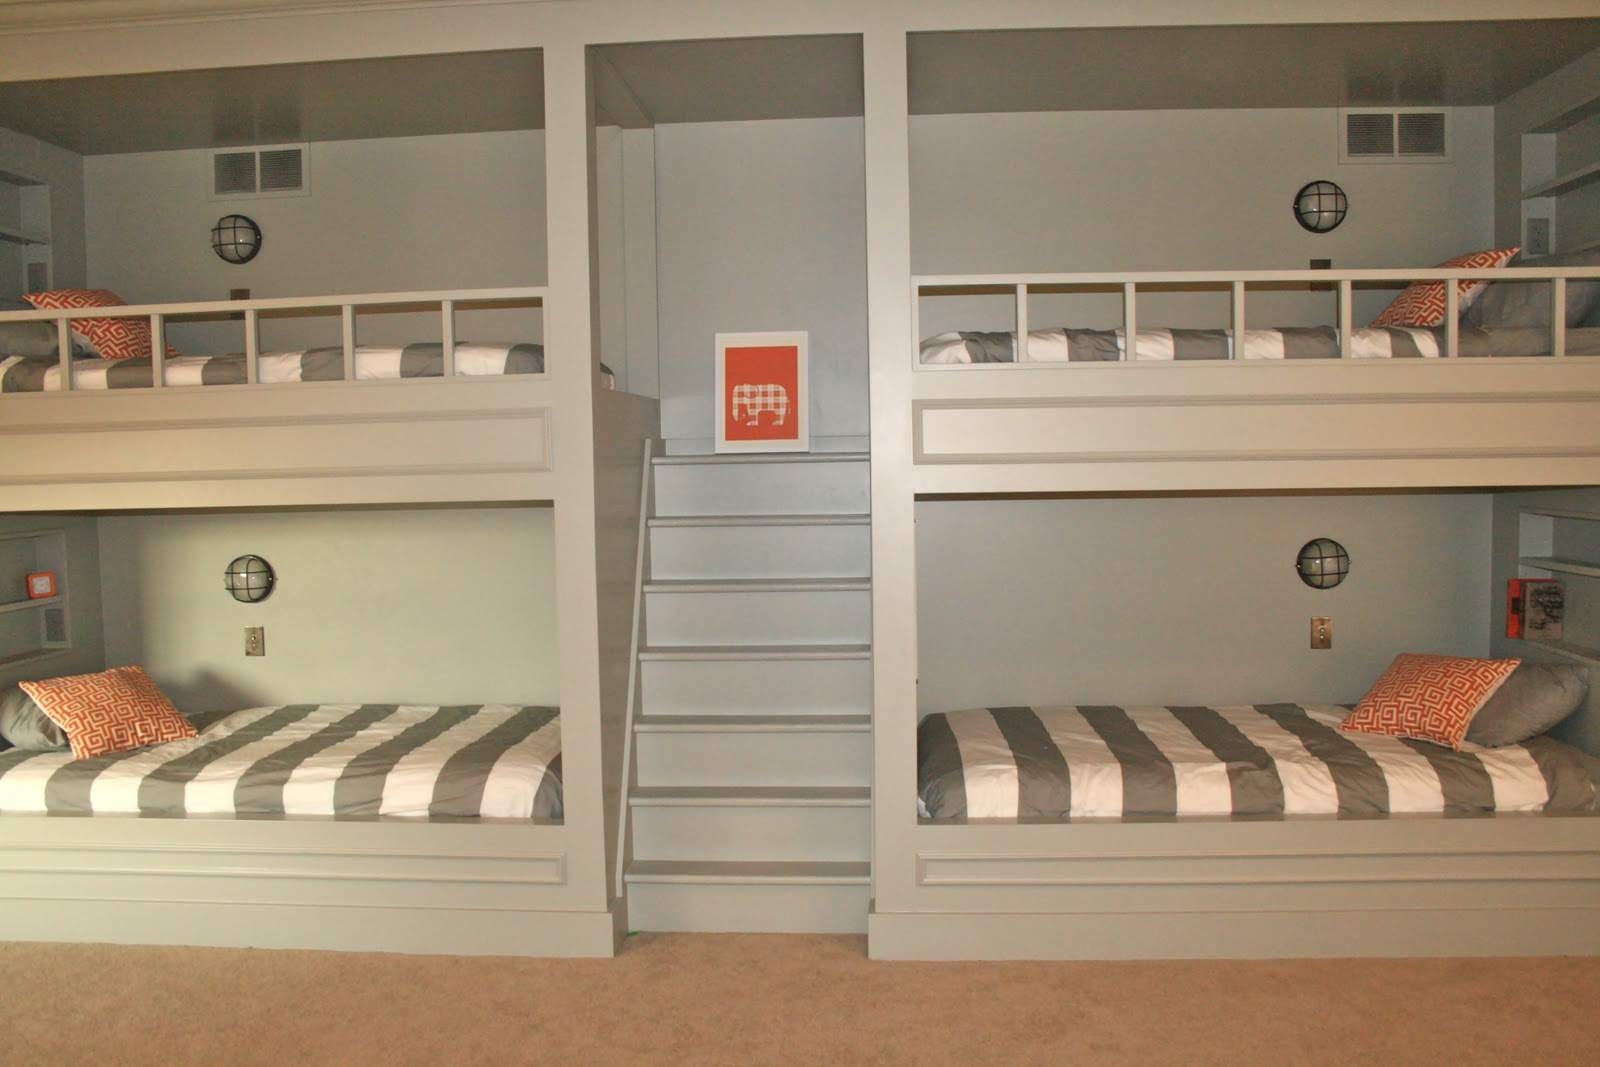 double deck bed for girls